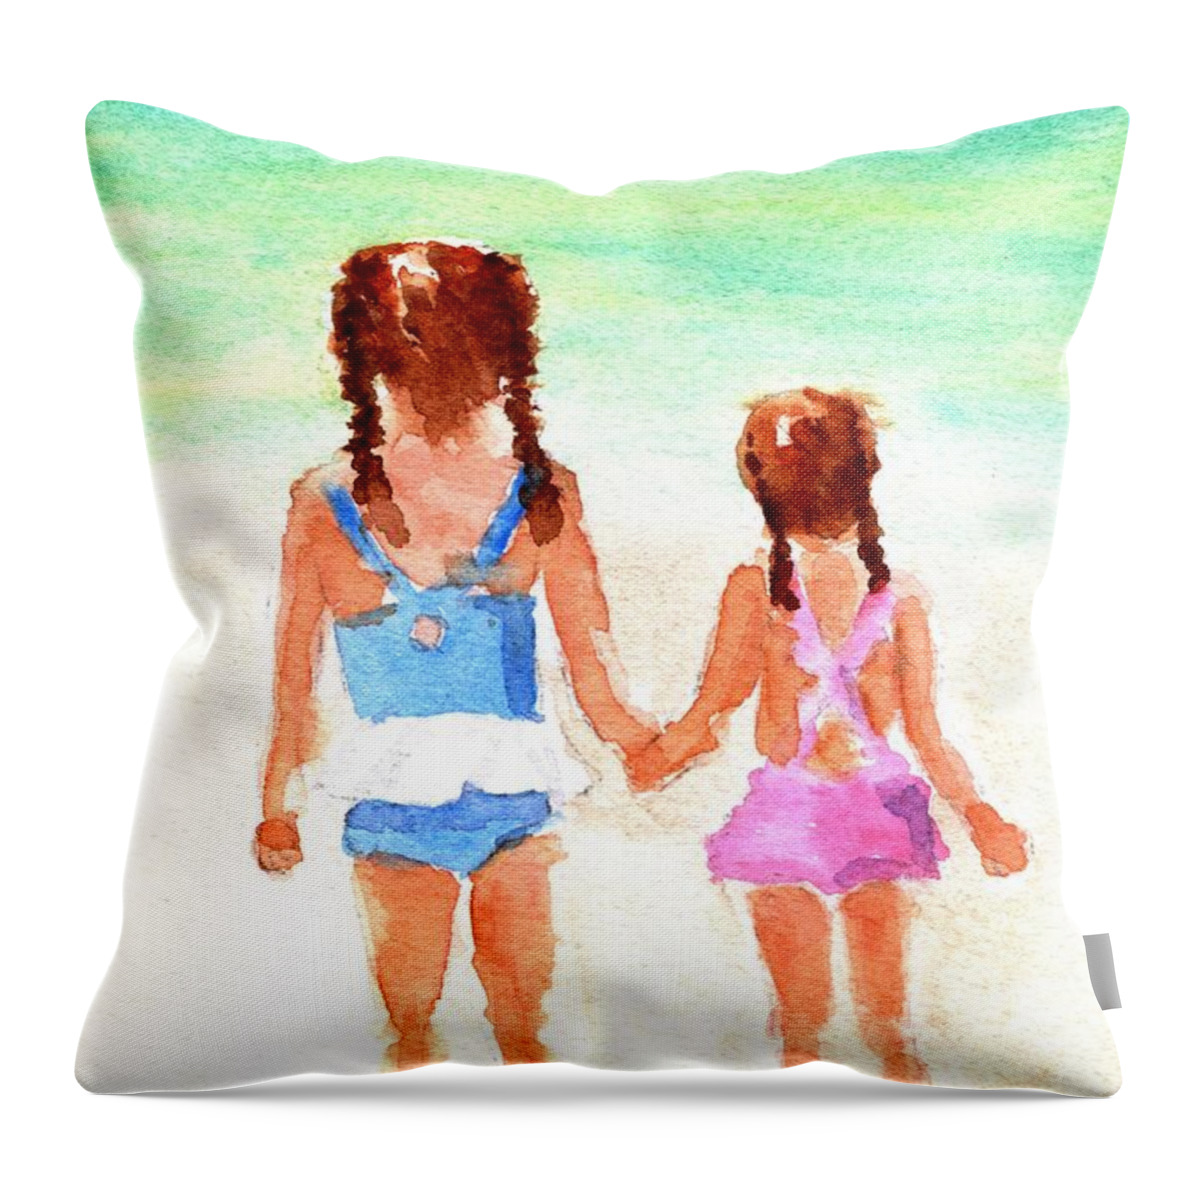 Little Sisters Throw Pillow featuring the painting Little Girls at the Beach by Carlin Blahnik CarlinArtWatercolor